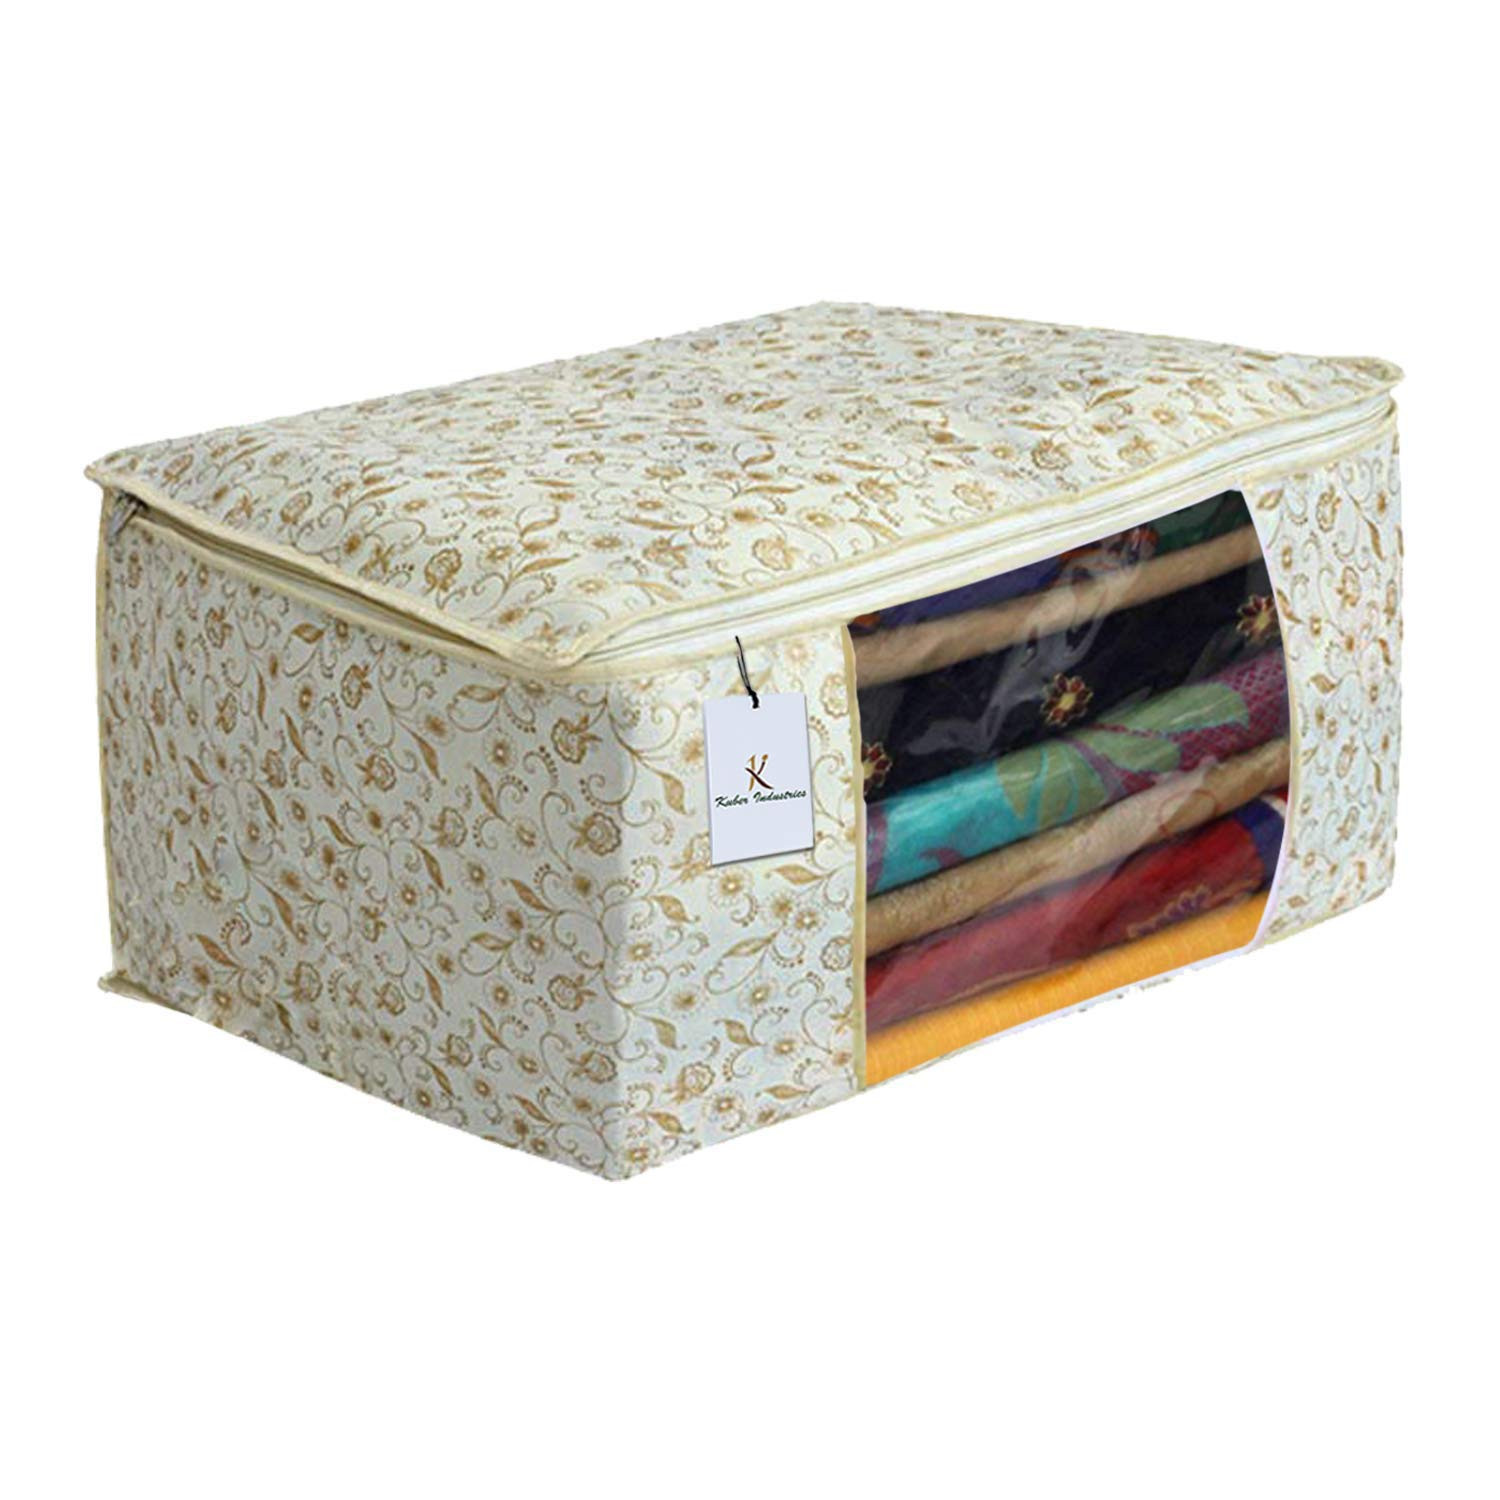 Kuber Industries Metalic Printed Non Woven Saree Cover And Underbed Storage Bag, Storage Organiser, Blanket Cover, Brown & Golden Brown & Ivory Red  -CTKTC42401